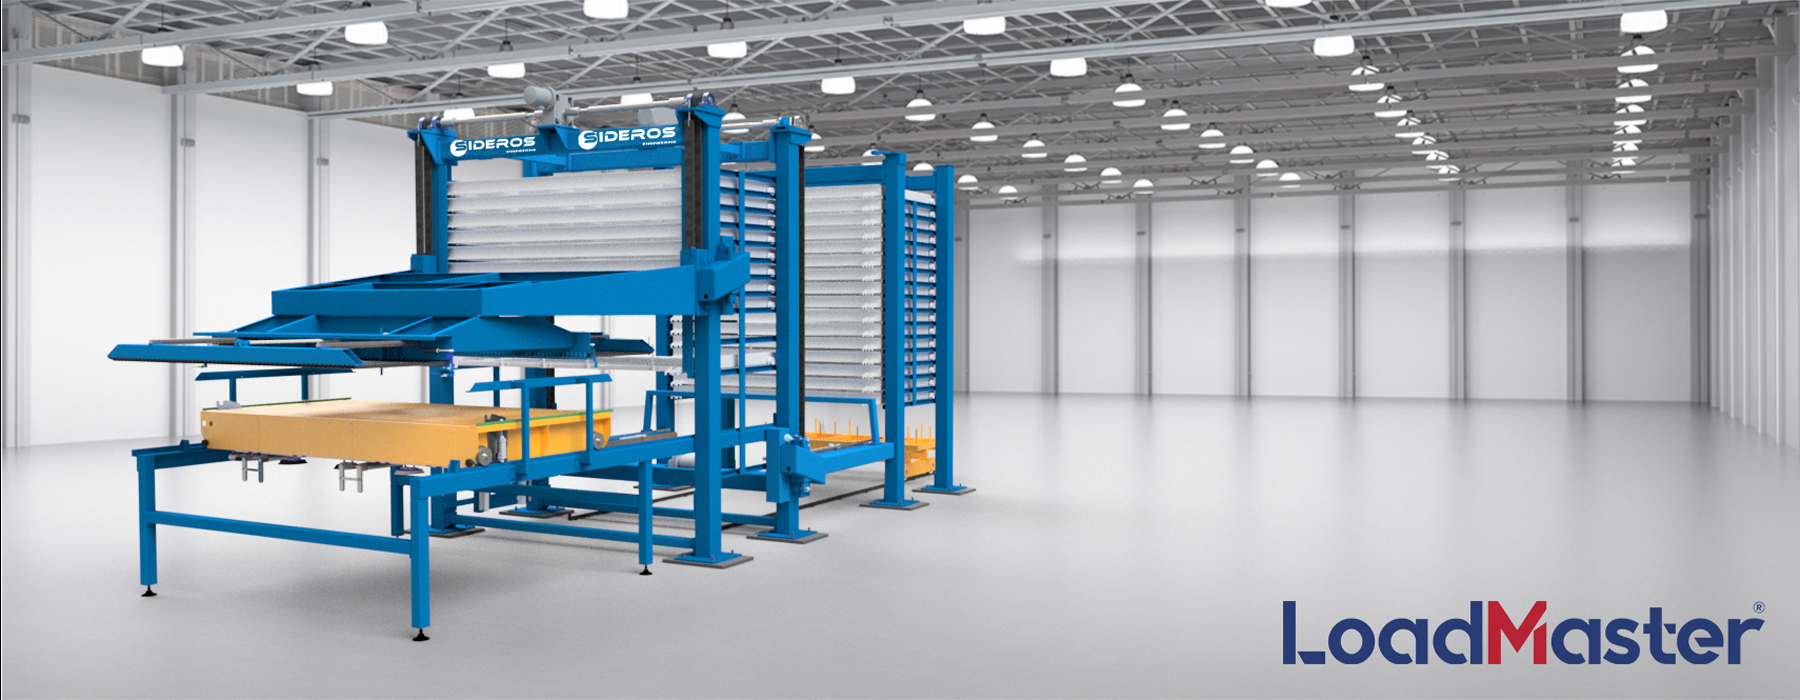 loamaster magazzino | Automated Load and Unload System for sheet metal integrated with Storage Systems